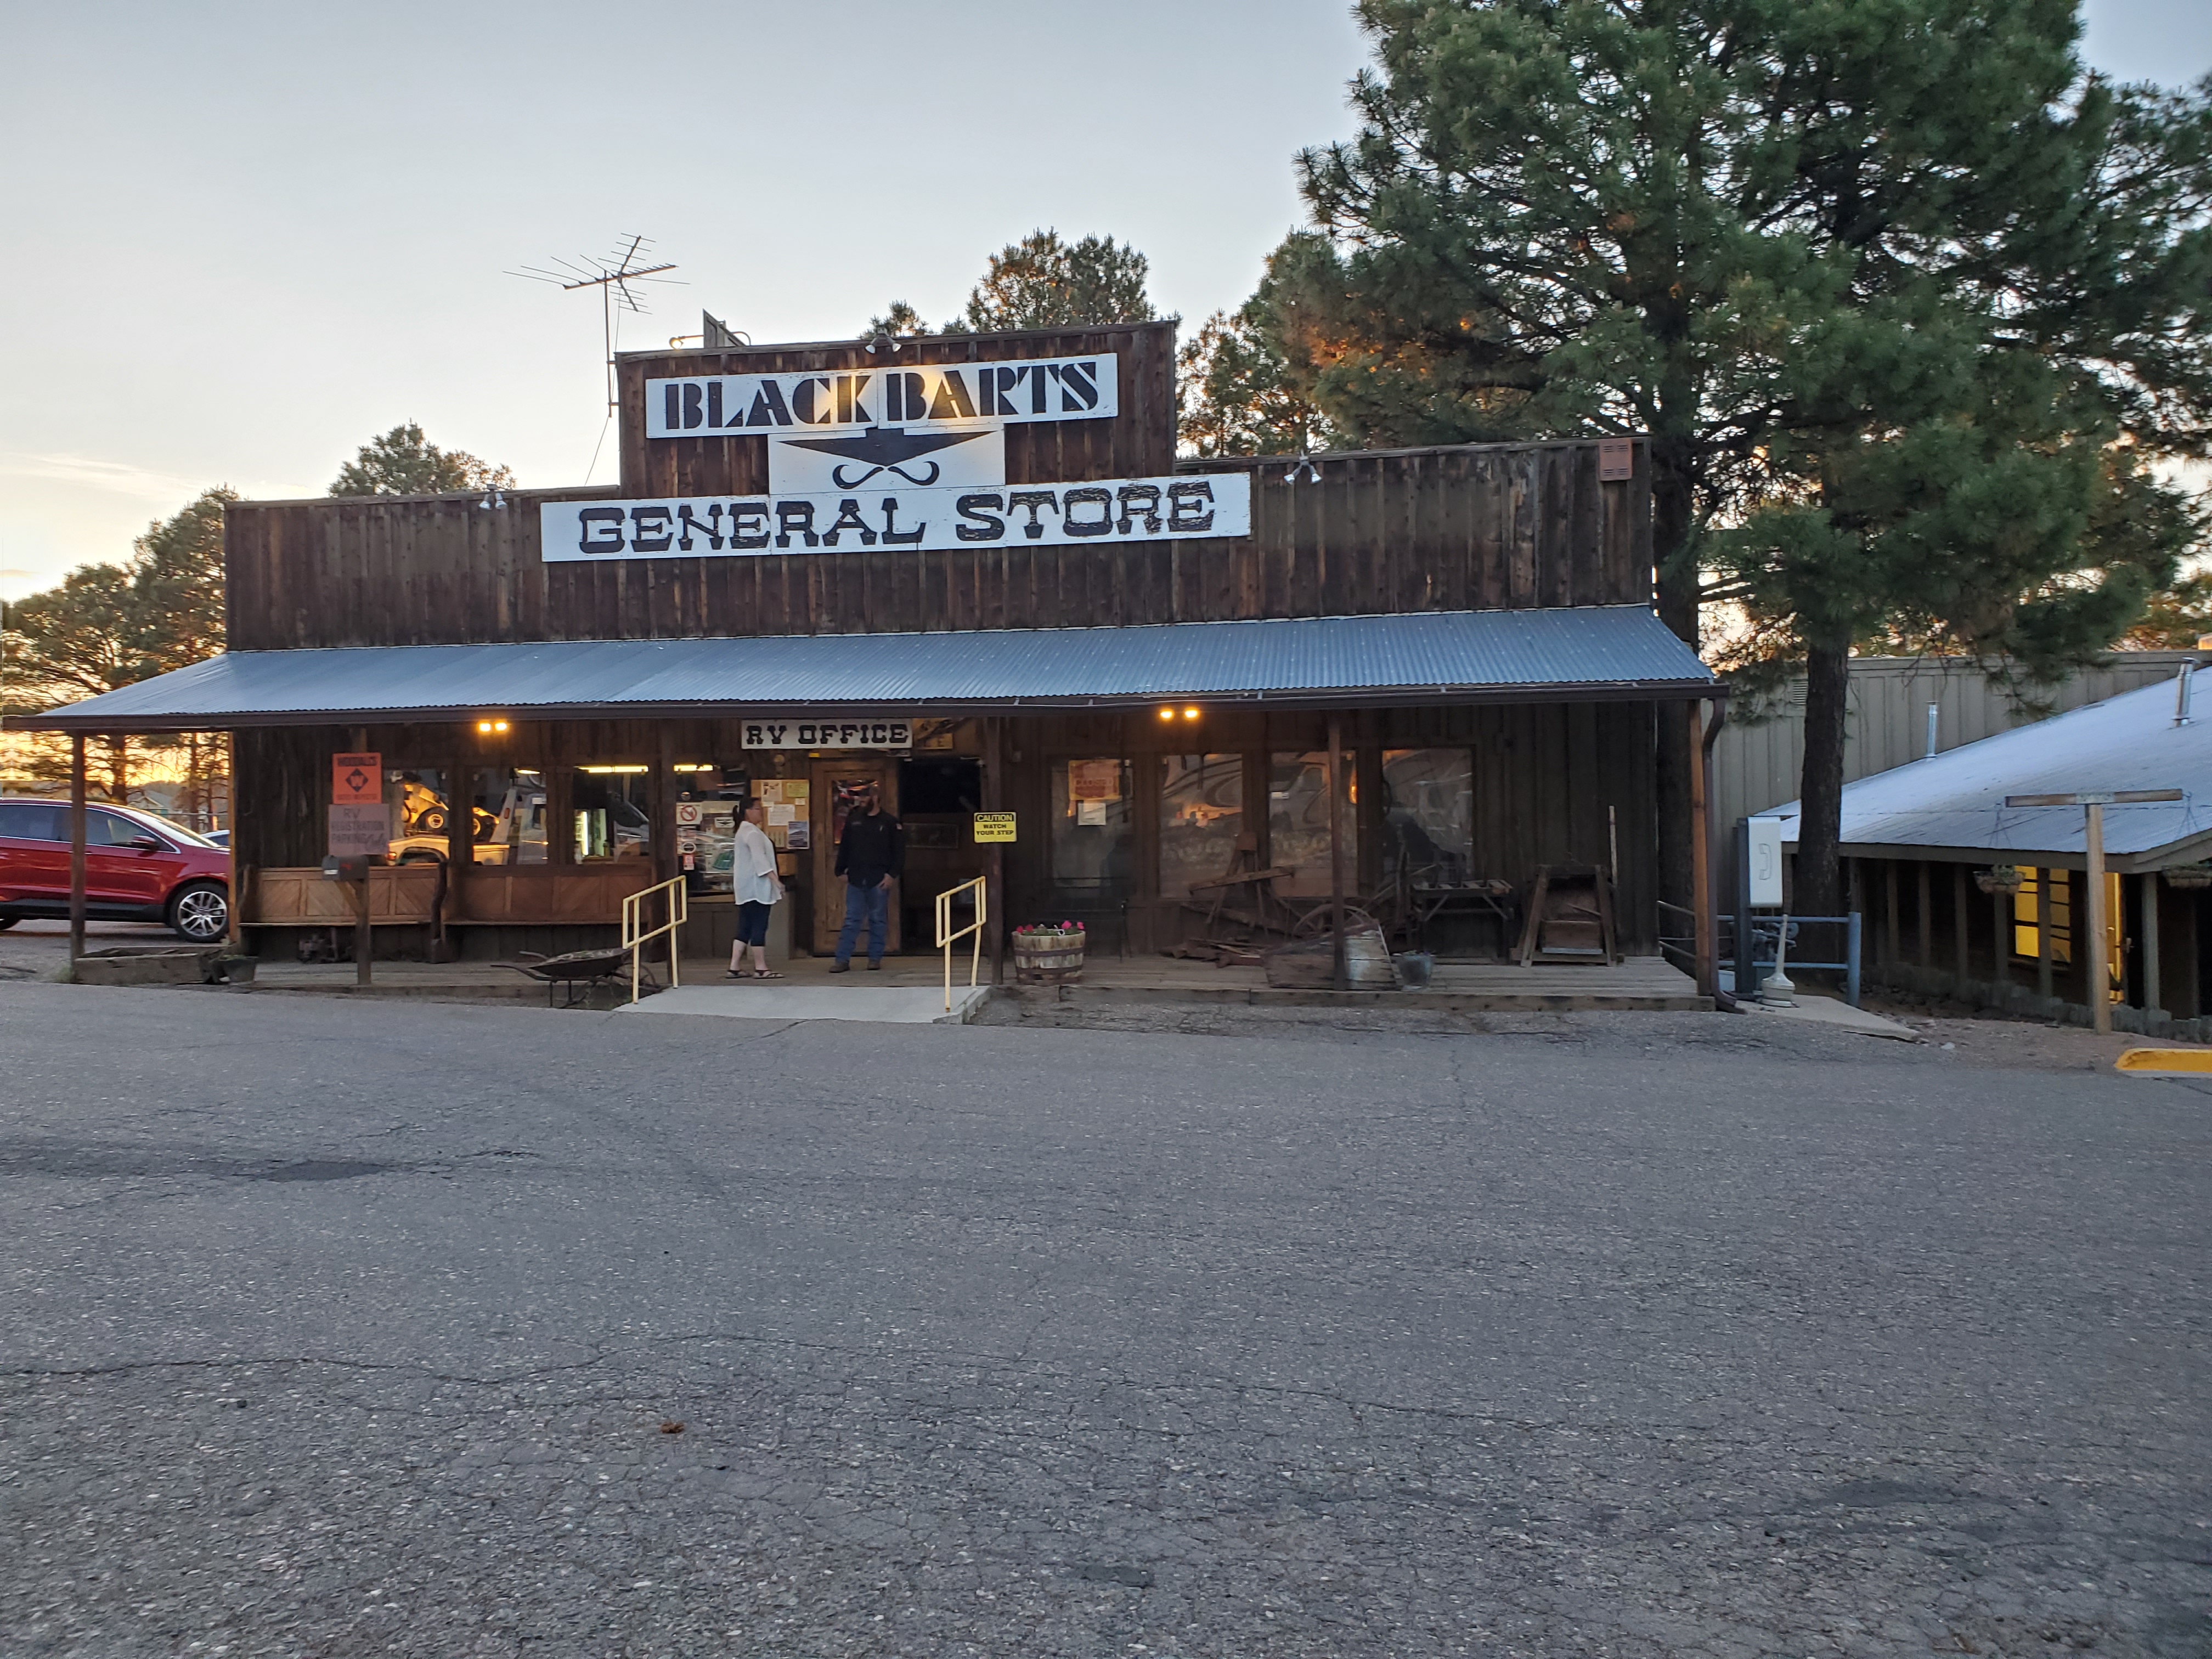 Black Bart's RV Park Office and General Store.